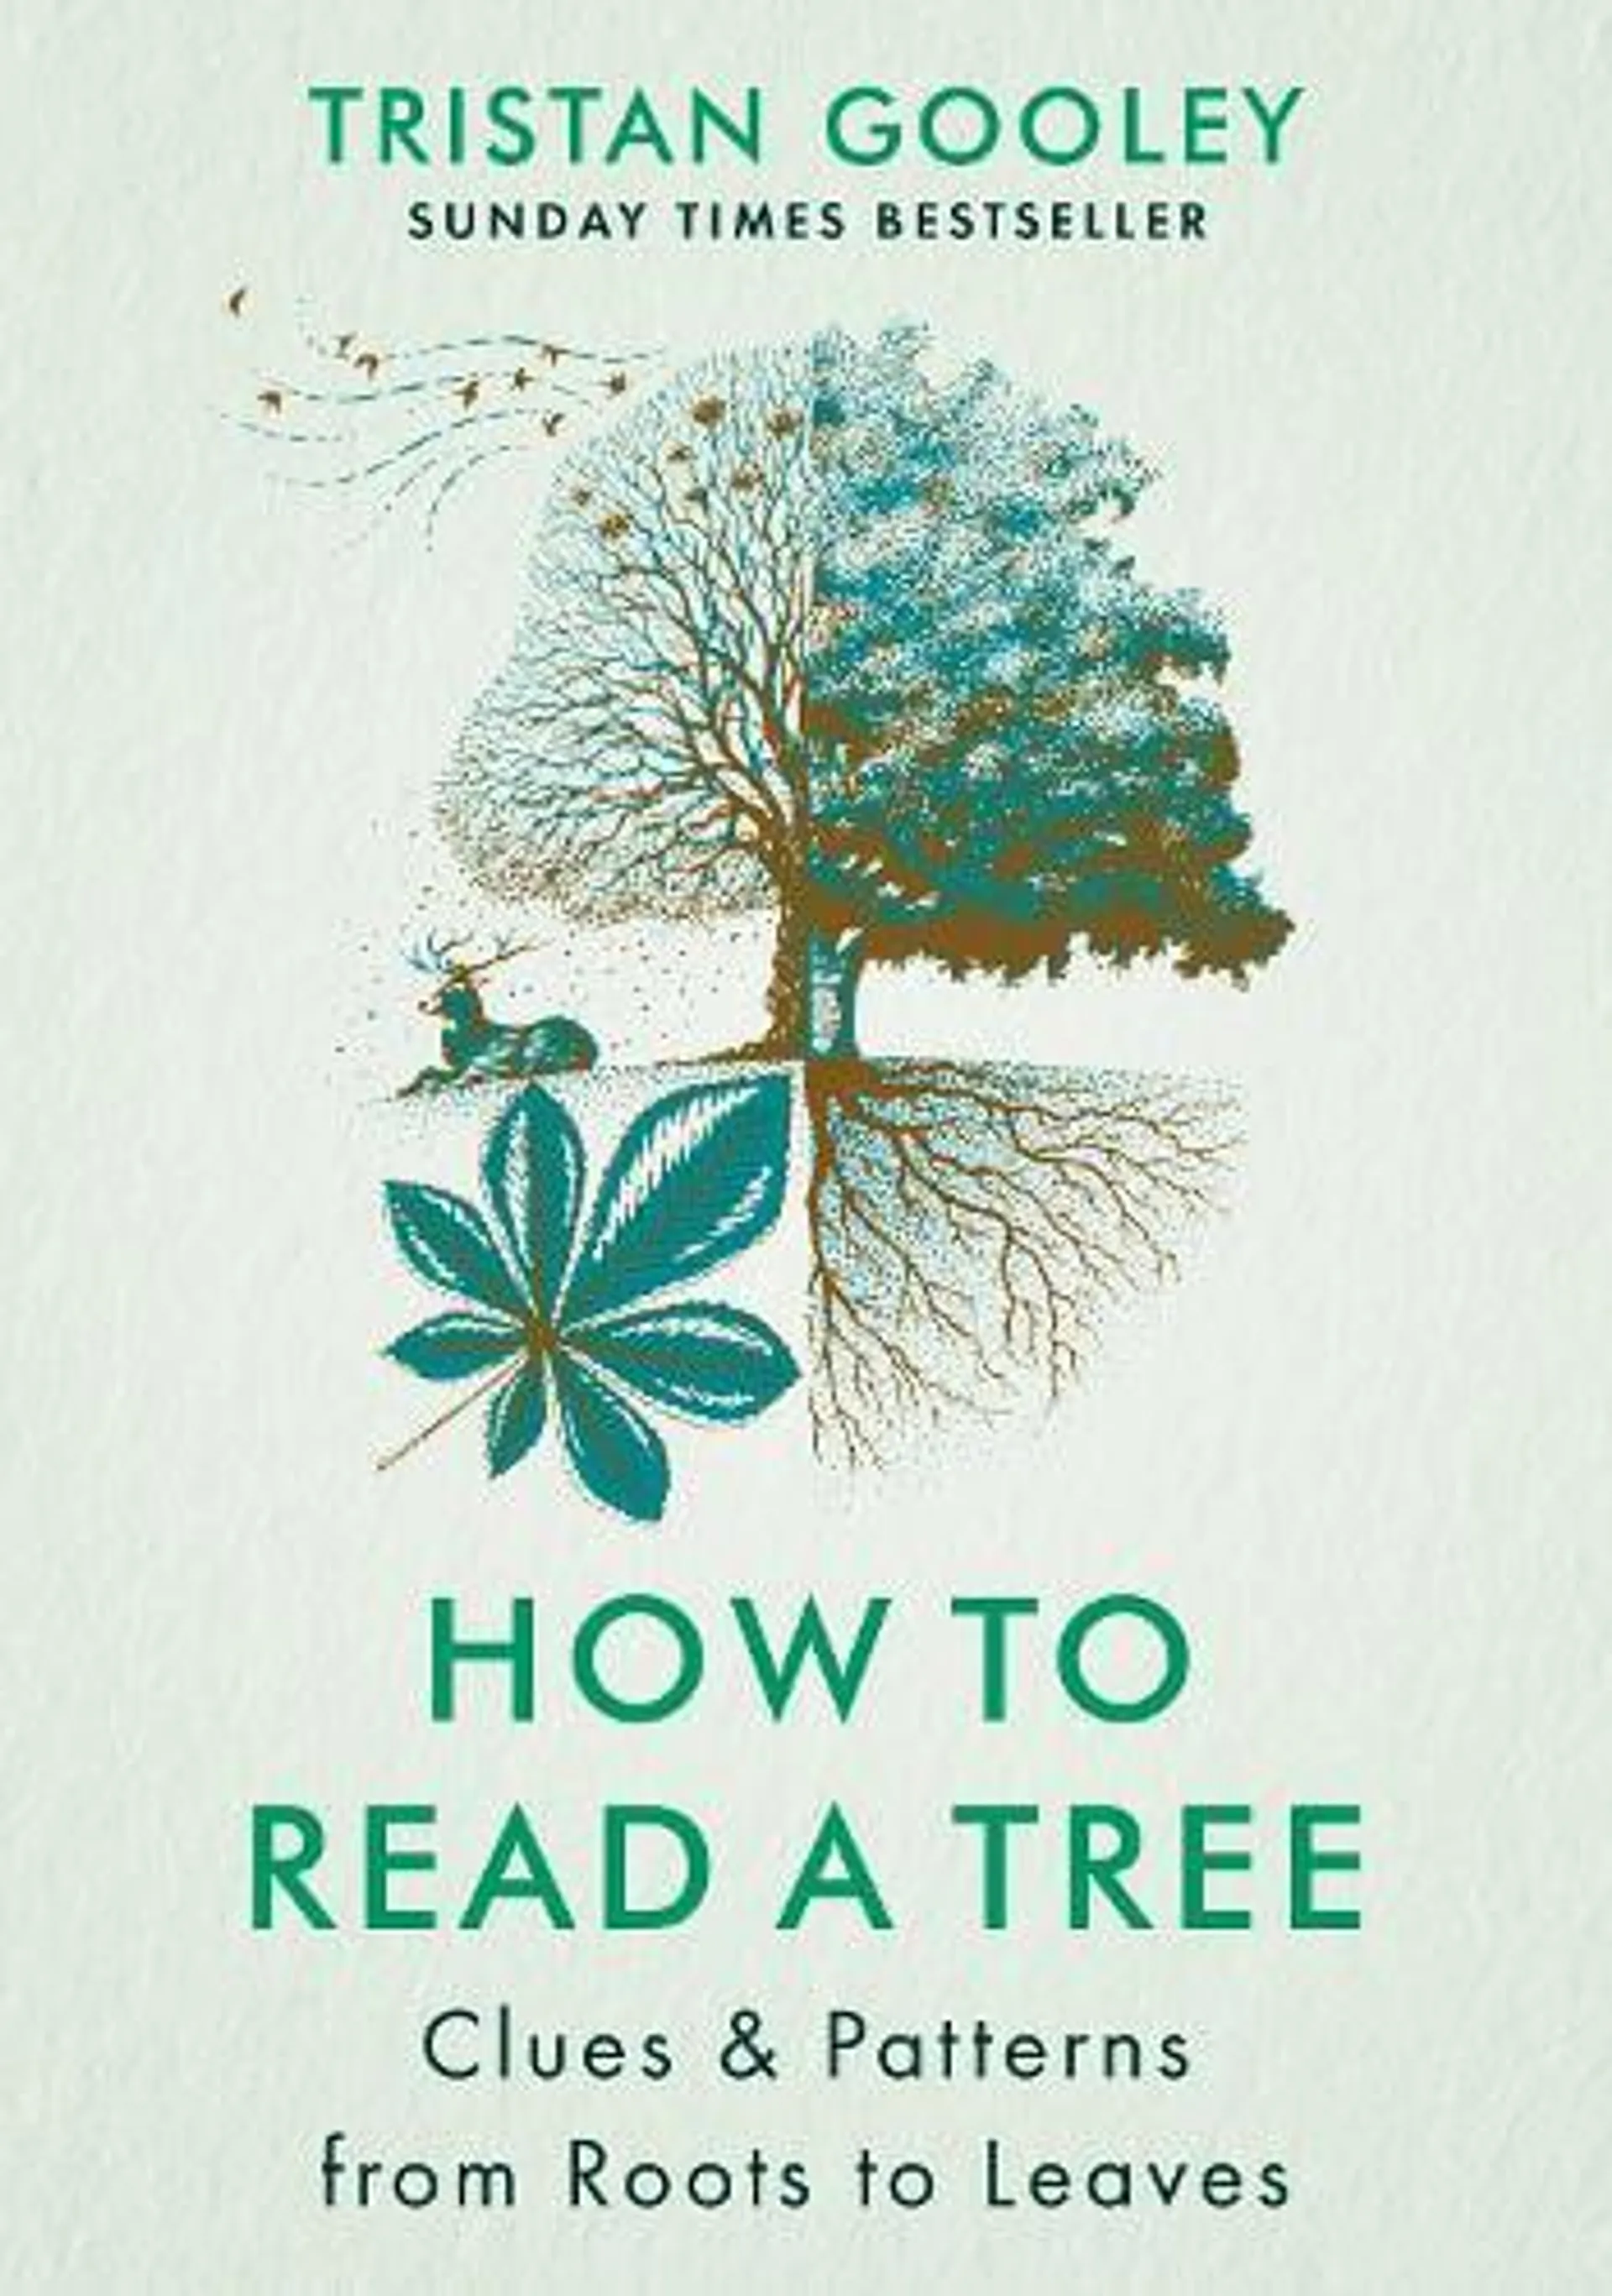 How to Read a Tree: The Sunday Times Bestseller (Hardback)